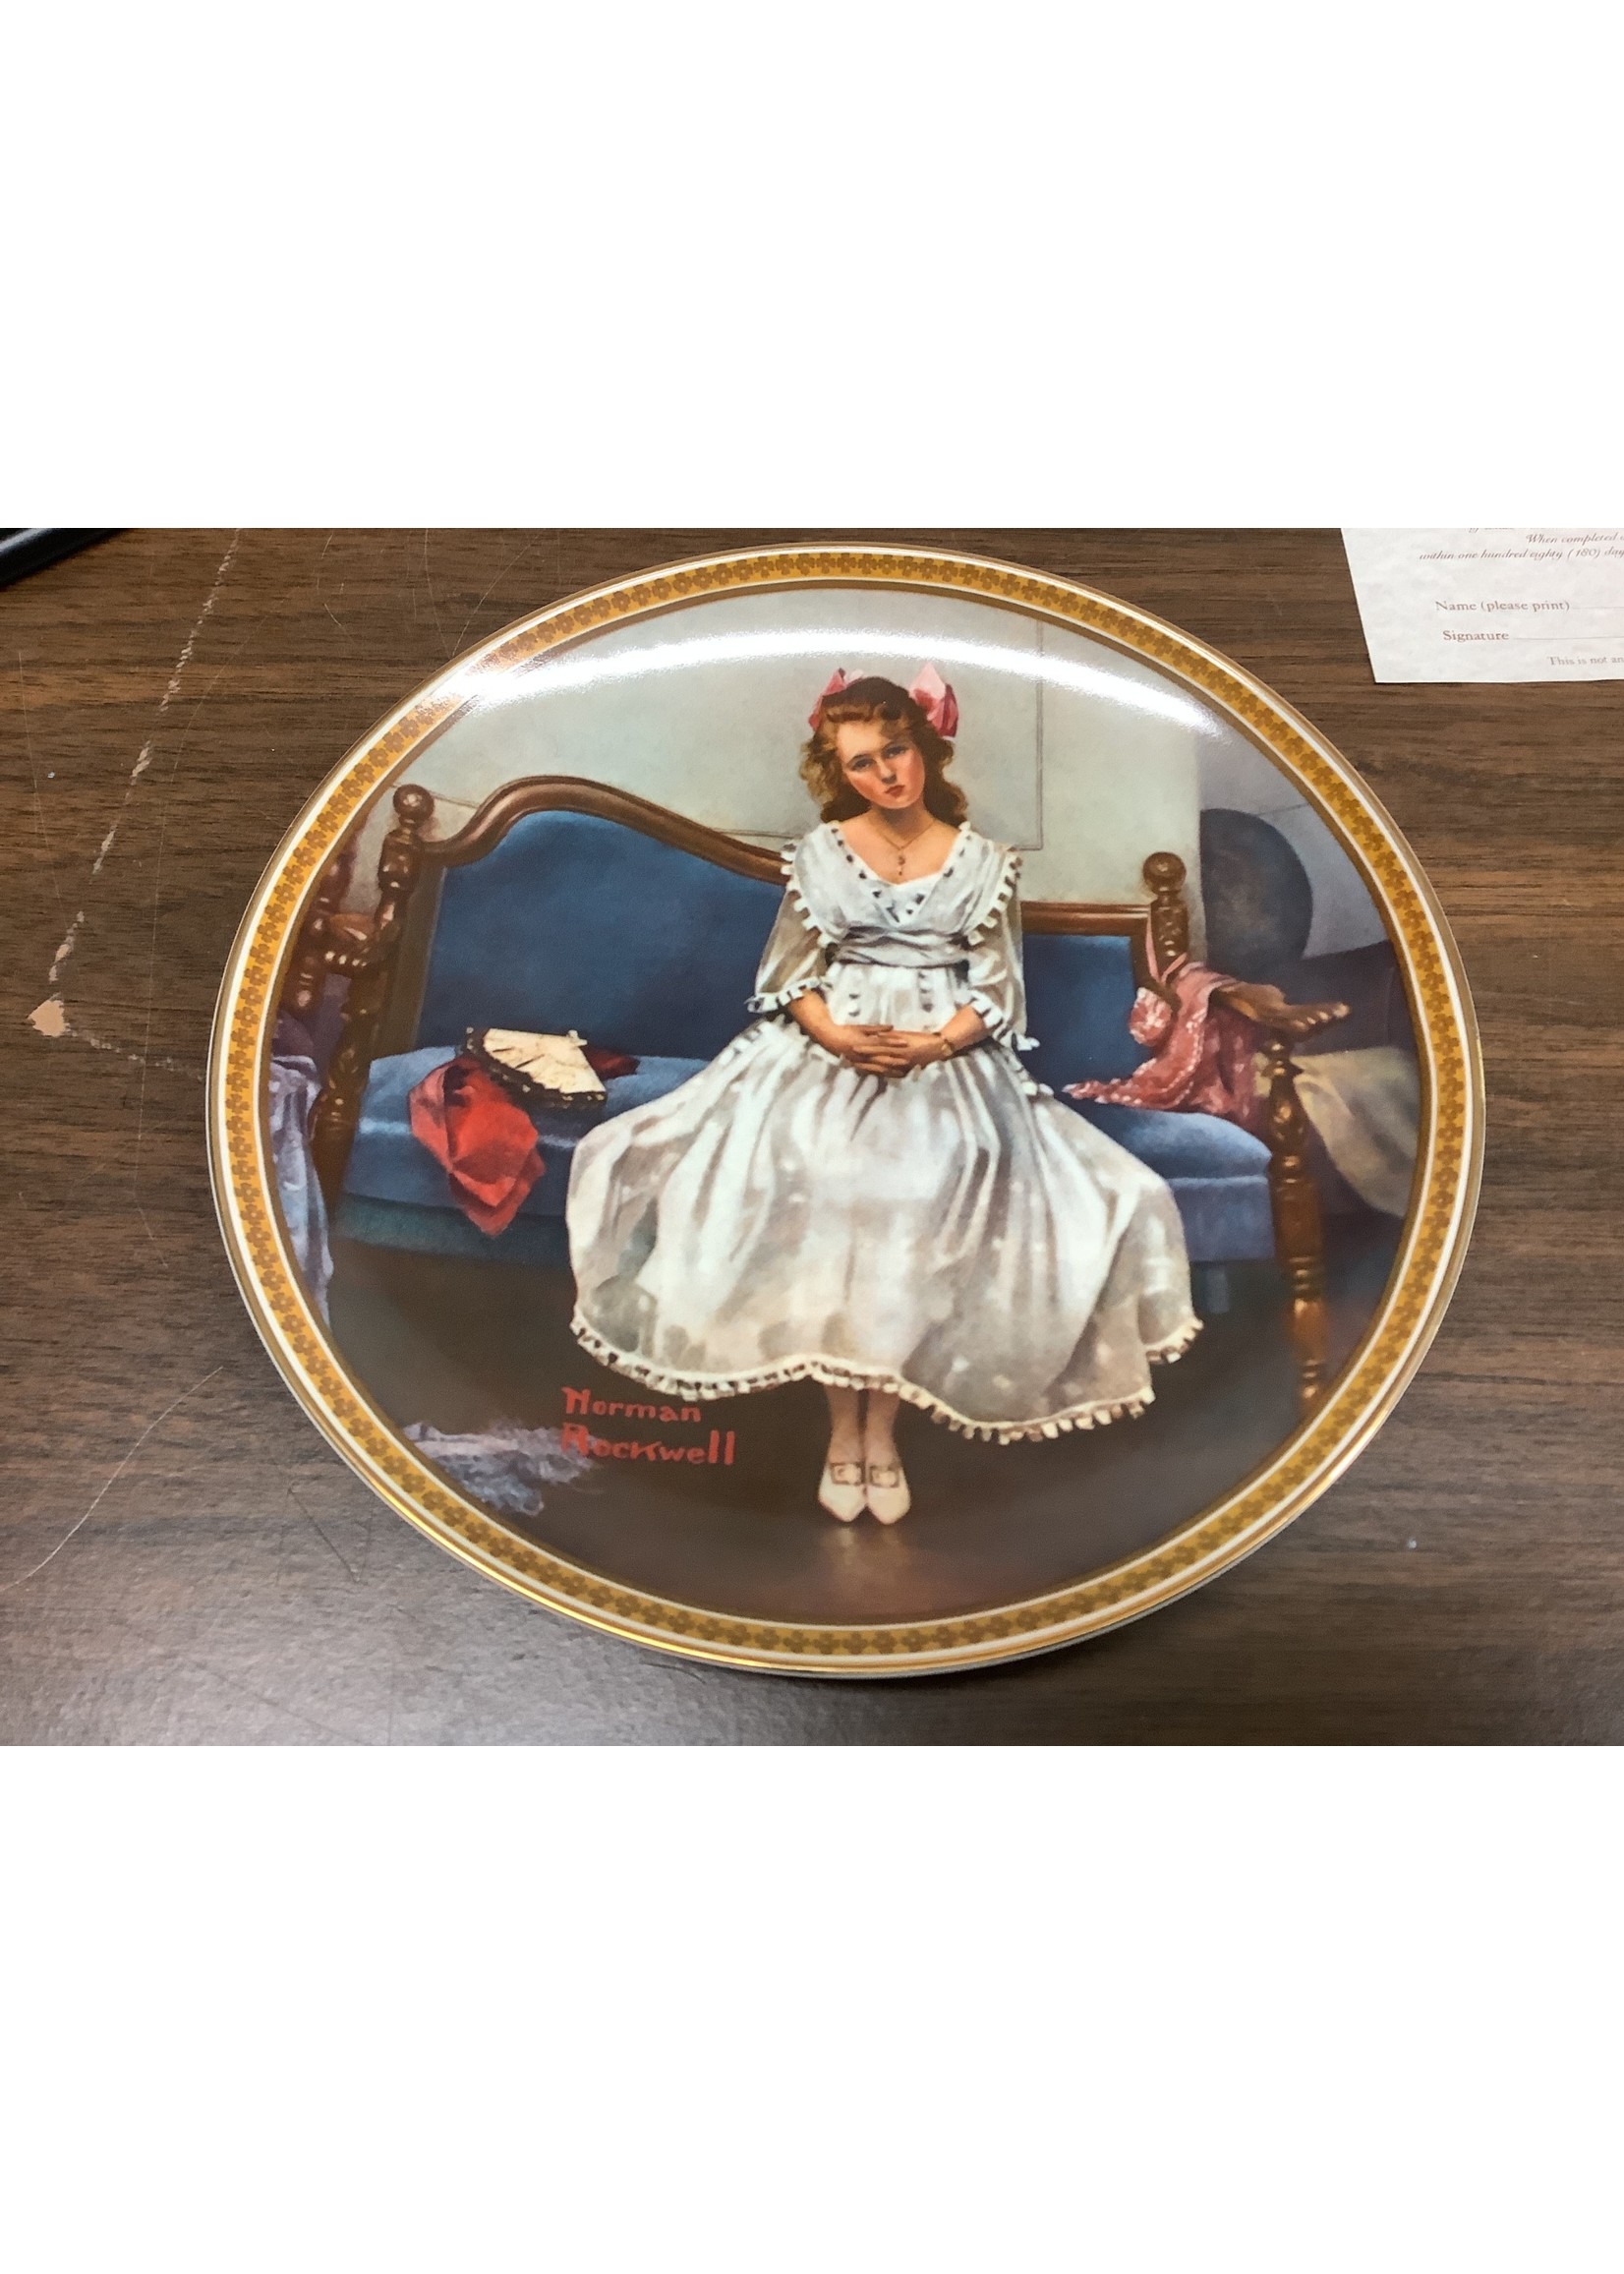 The Bradford Exchange Collectors Plate (1993) “Waiting at the Dance” Bradex-No. 84-R70-4.5